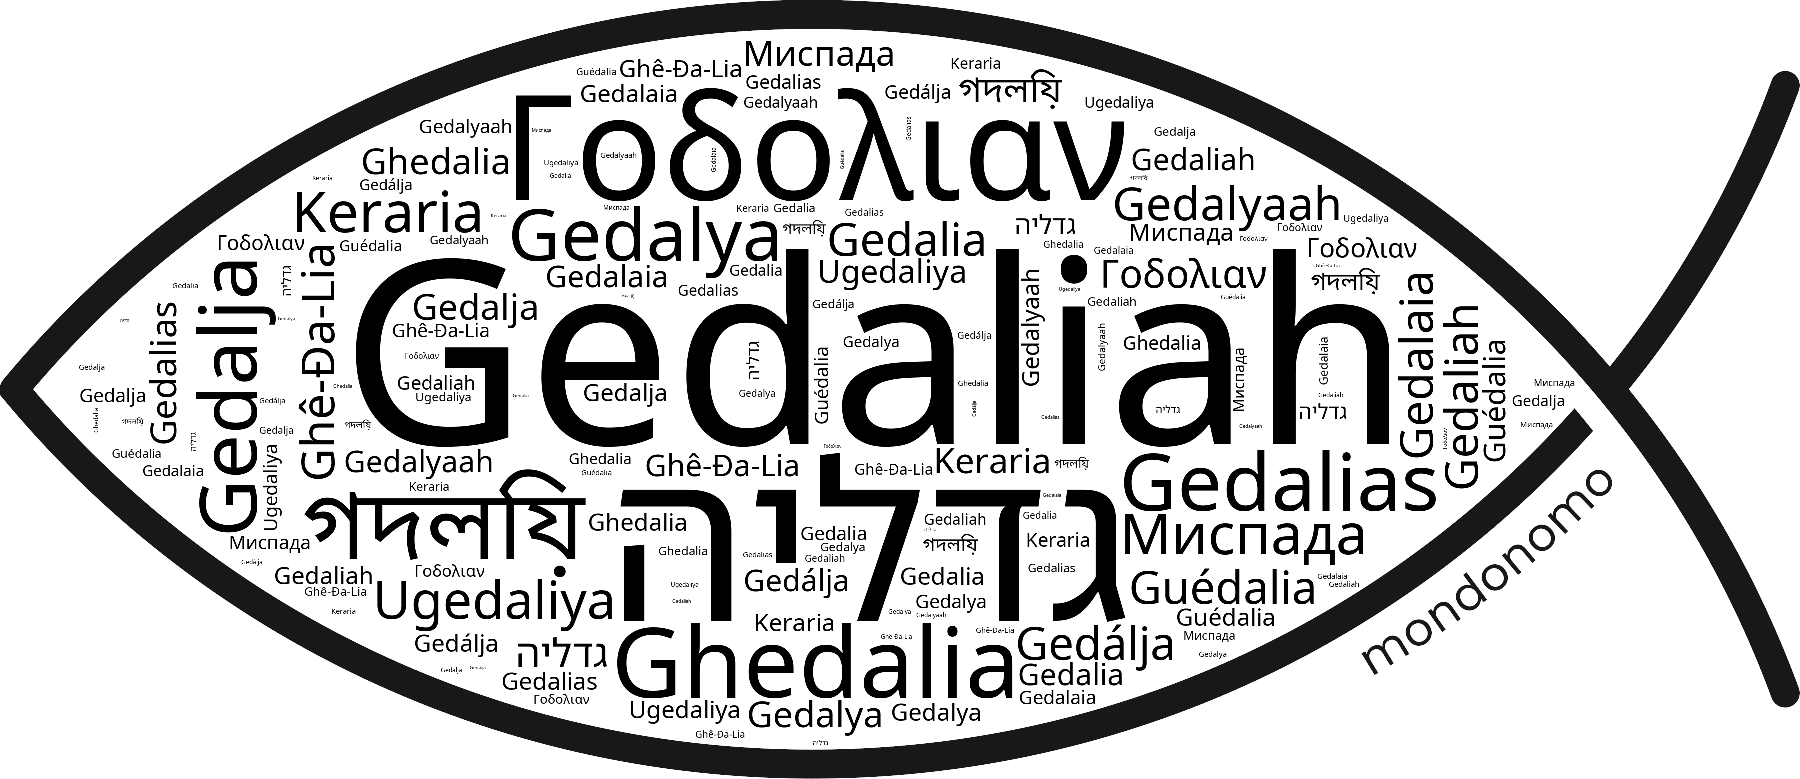 Name Gedaliah in the world's Bibles